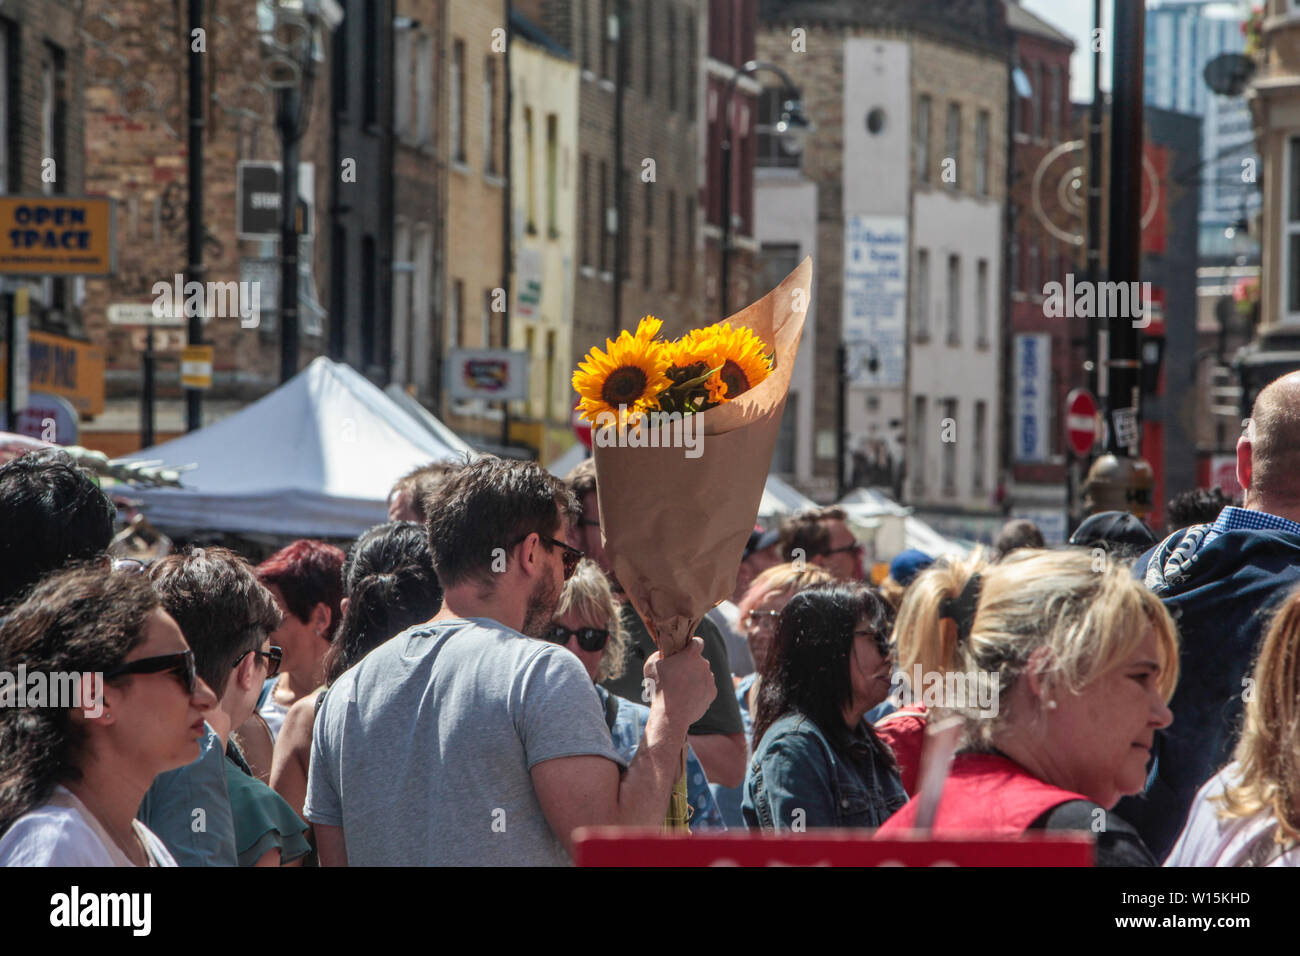 London, UK. 30th June, 2019. London enjoed a bit of a cooler weather today with temperatures showing 25 Max, people enjoying the sunshine in Bricklane.Paul Quezada-Neiman/Alamy Live News Credit: Paul Quezada-Neiman/Alamy Live News Stock Photo